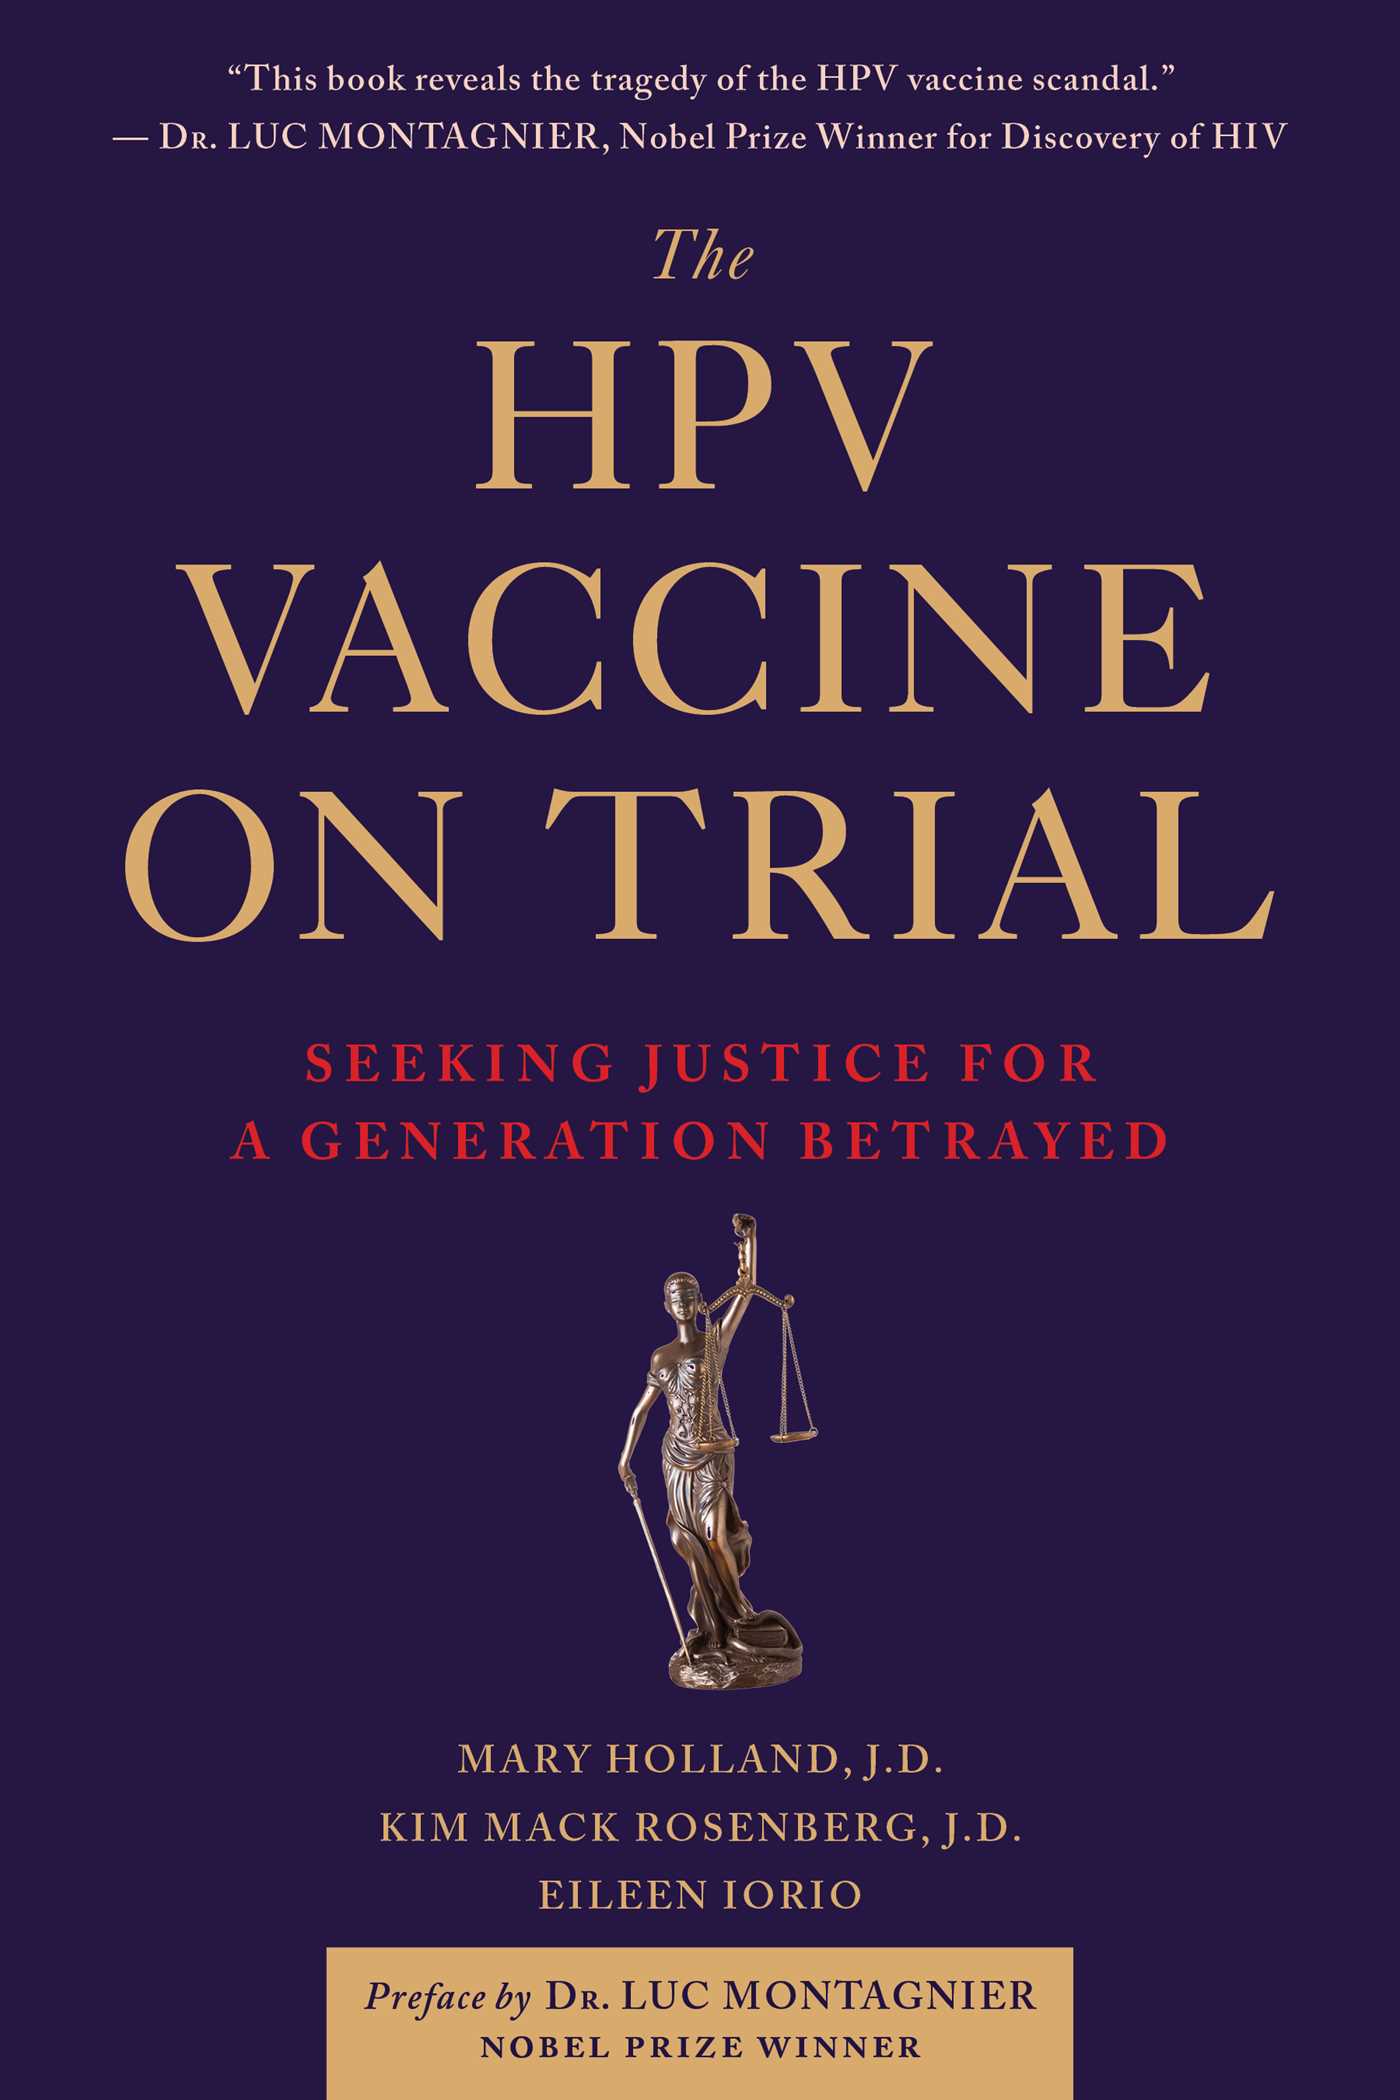 HPV Vaccine On Trial (The) : Seeking Justice For A Generation Betrayed | Holland, Mary